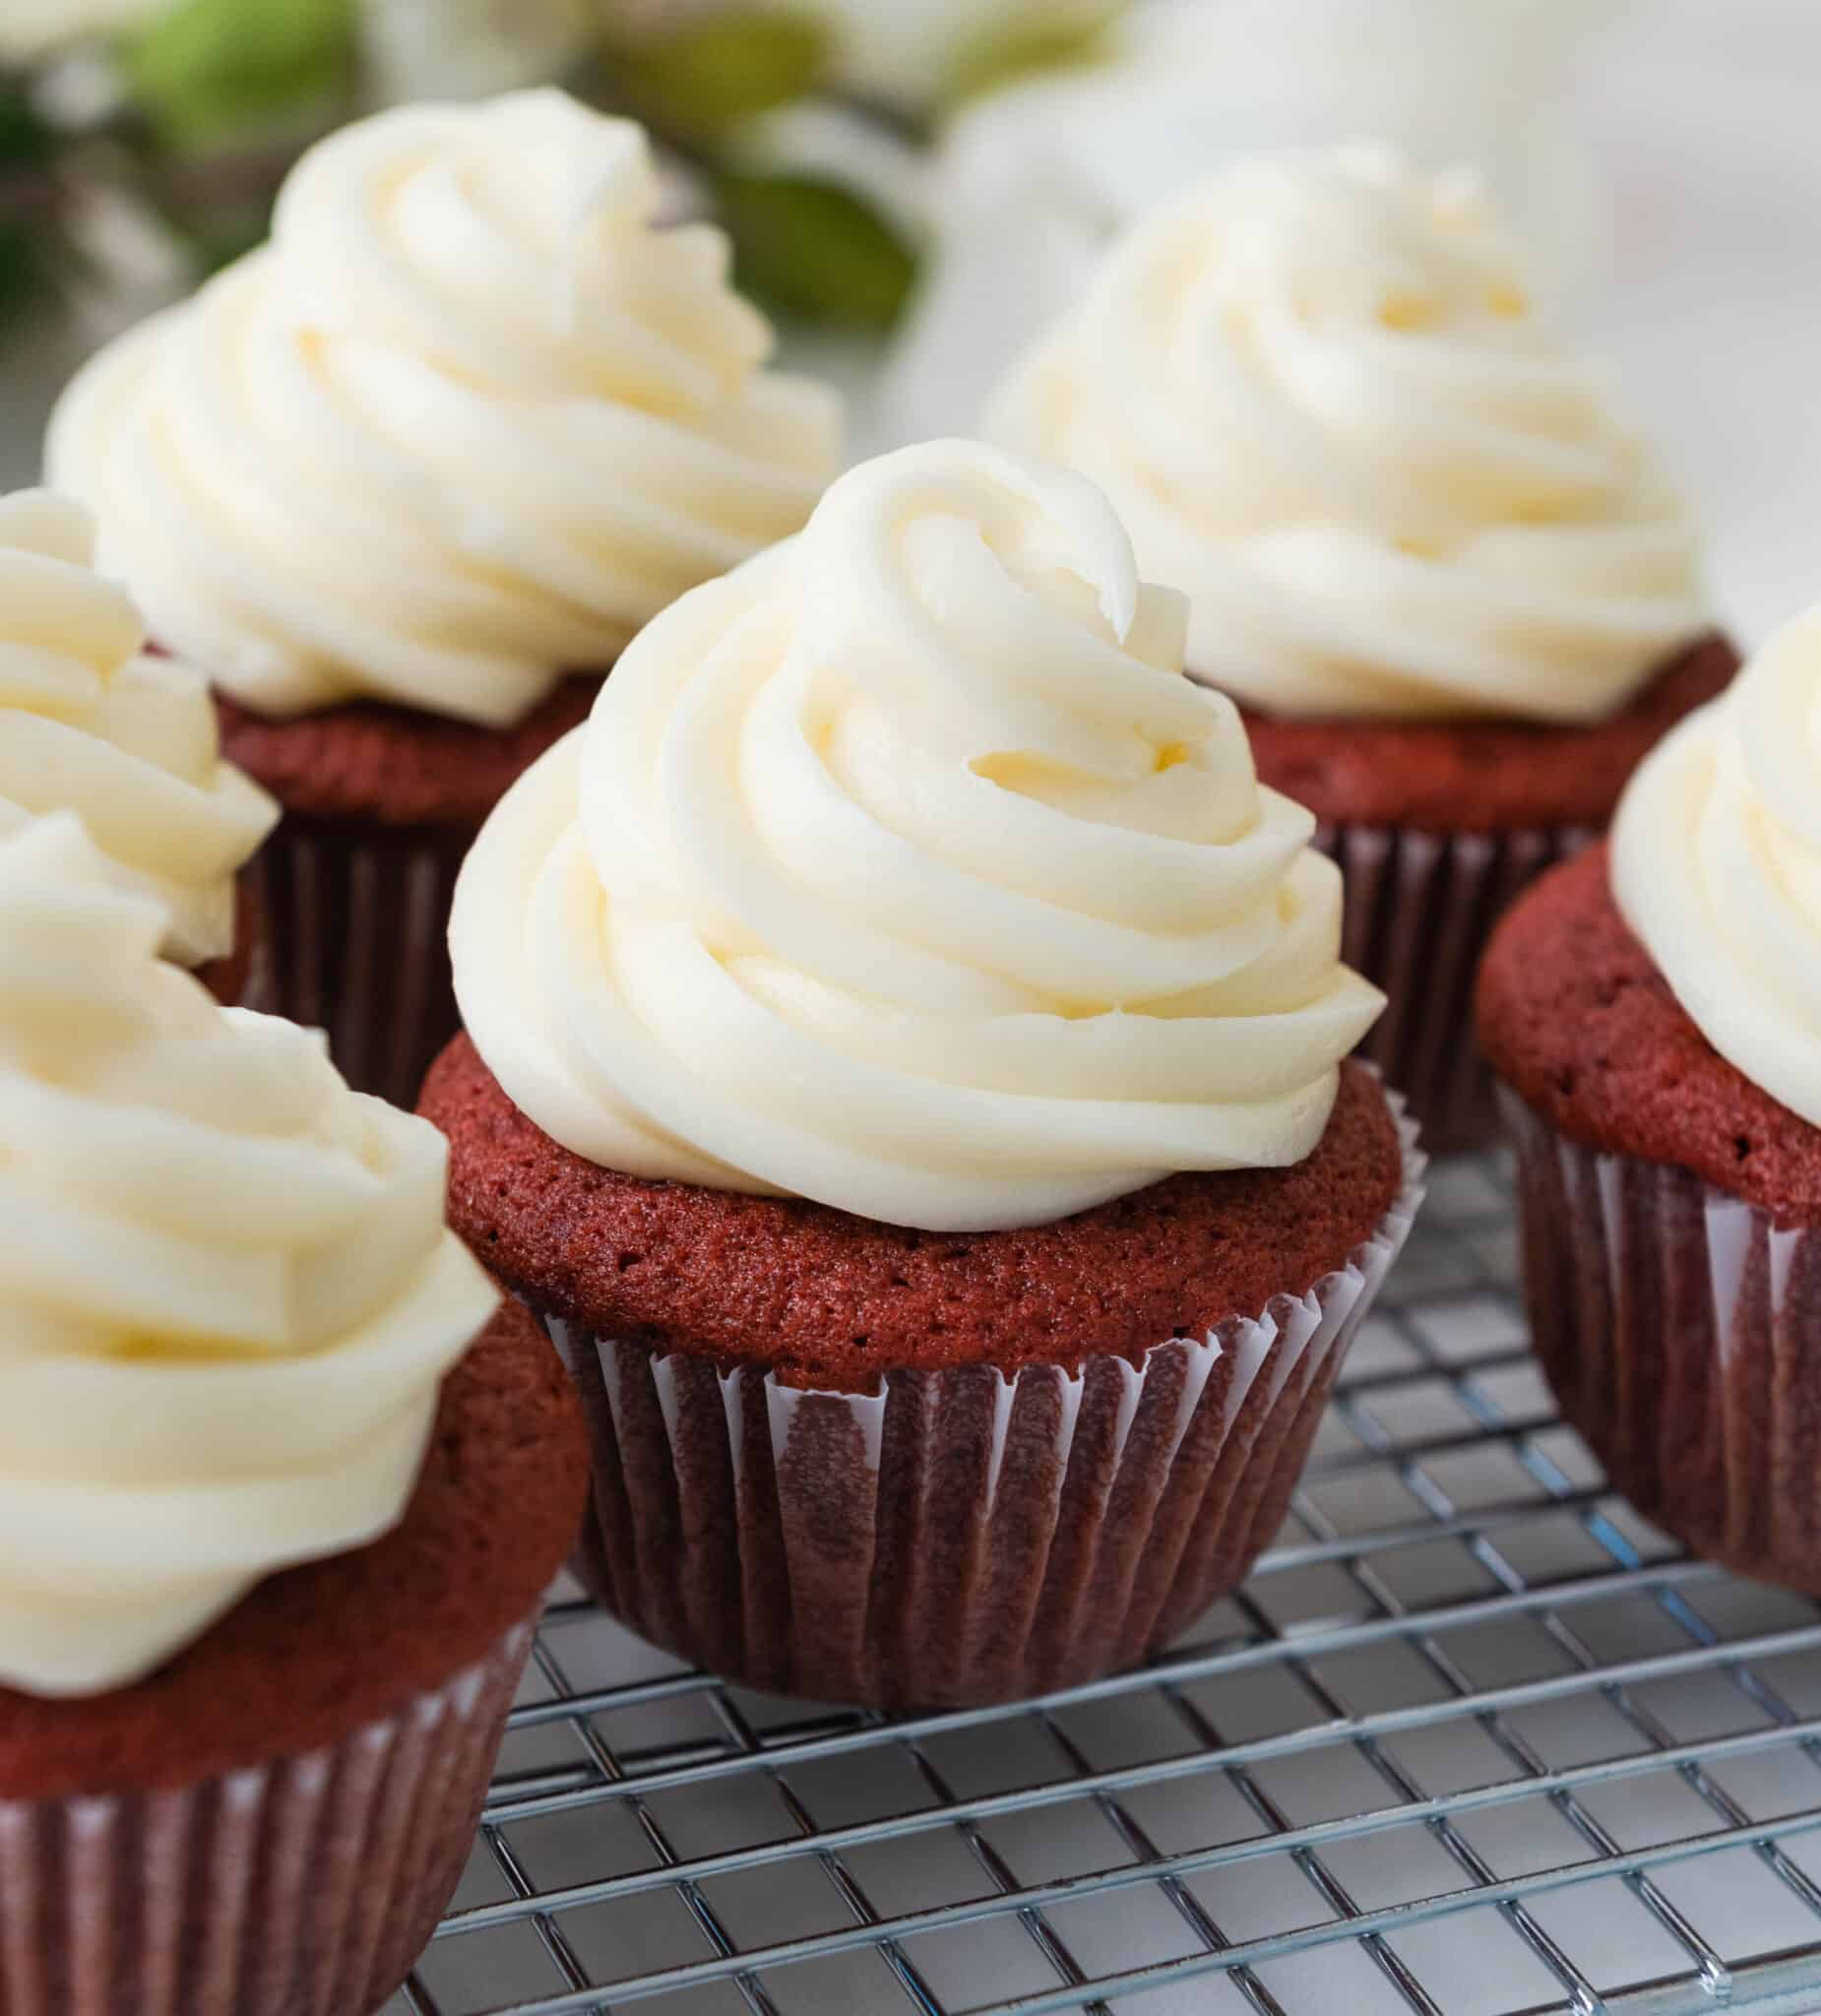 a cluster of red velvet cupcakes with swirls of cream cheese frosting on top